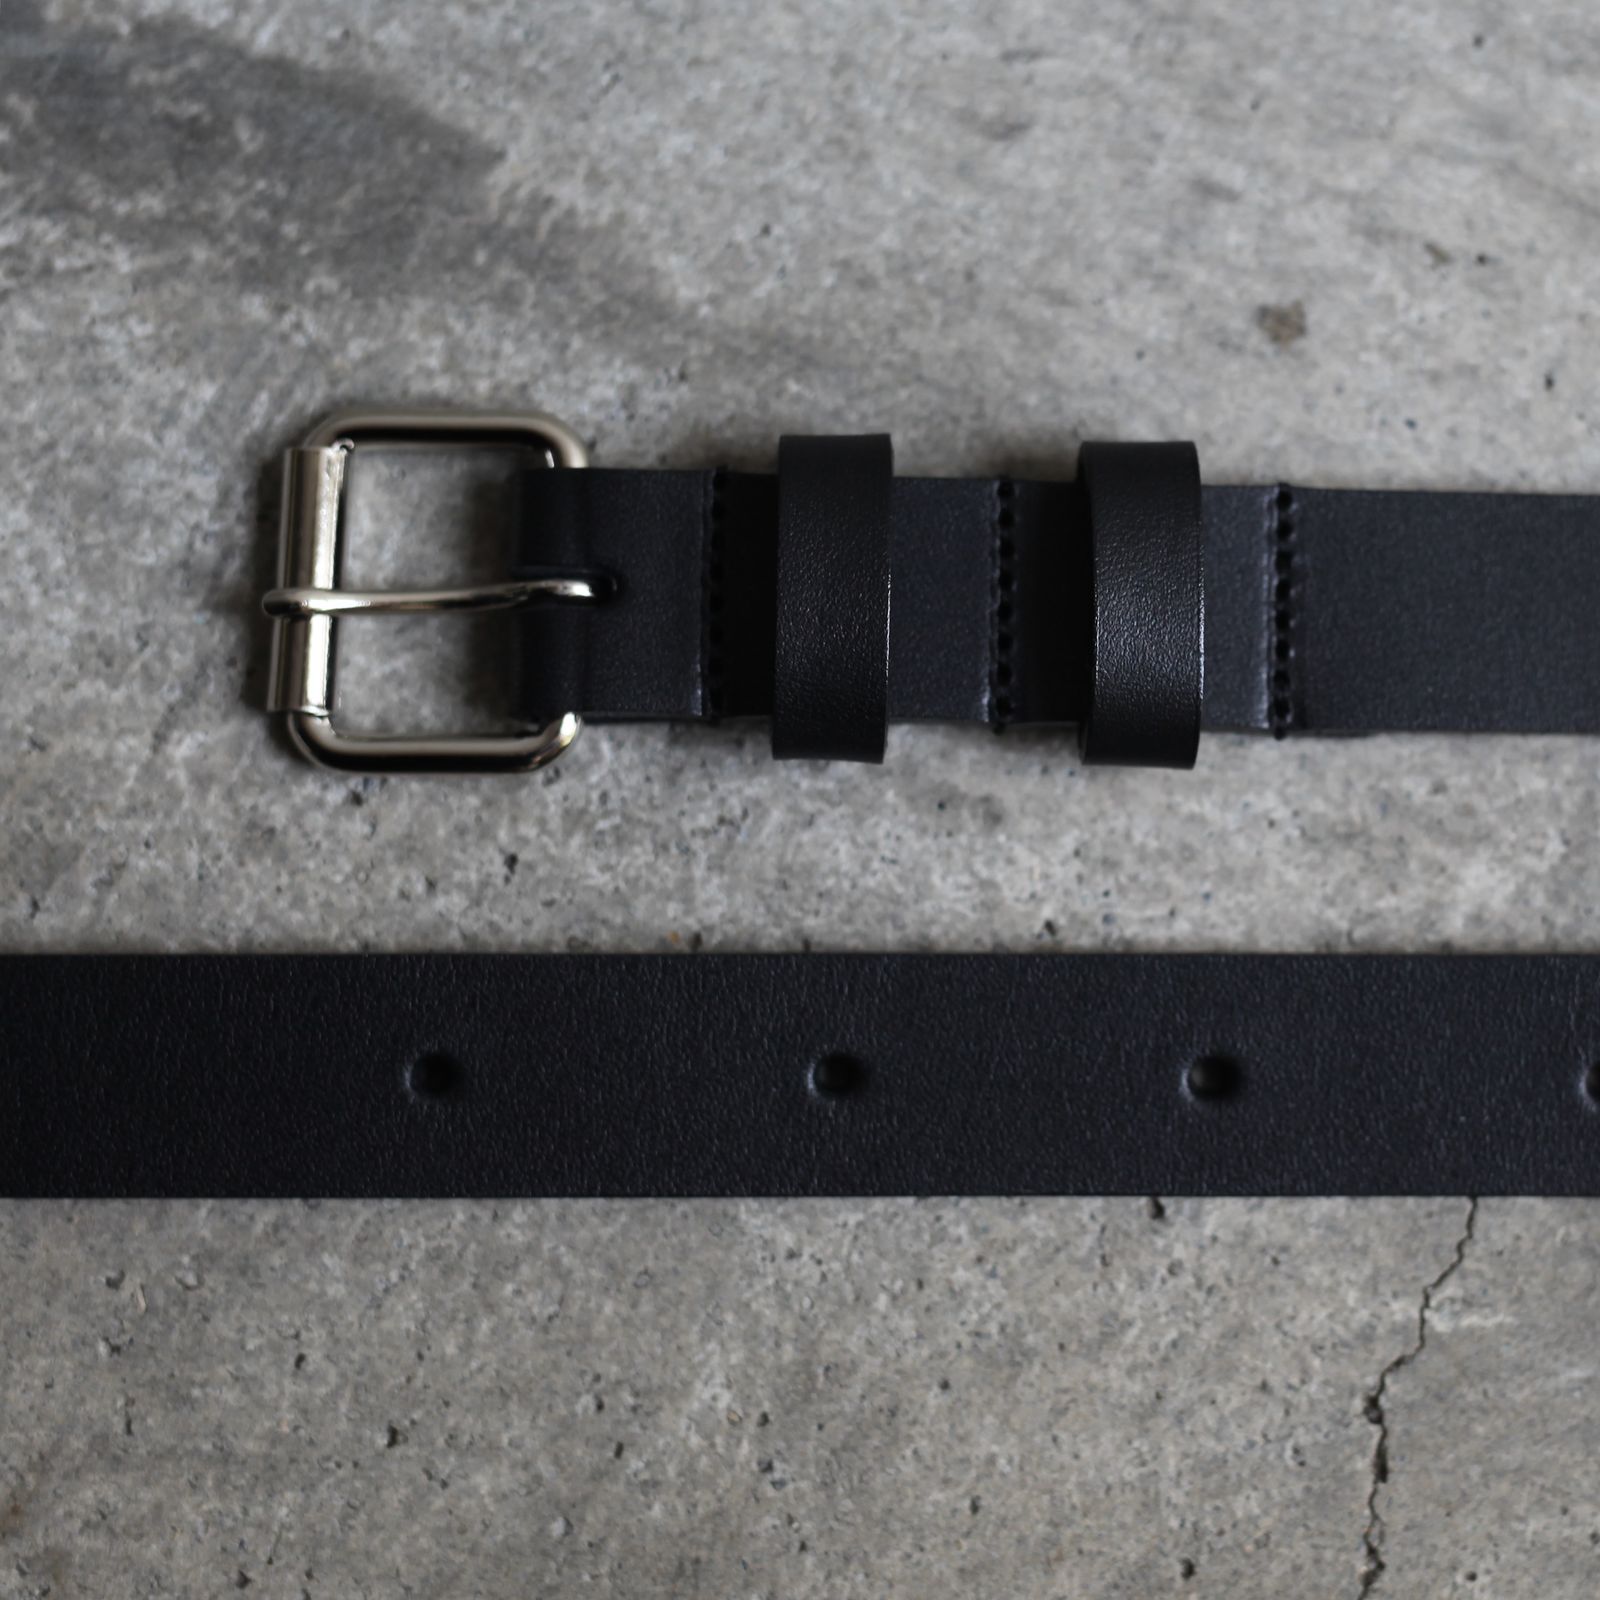 th products - 【残りわずか】Leather Belt SKI | ACRMTSM ONLINE STORE